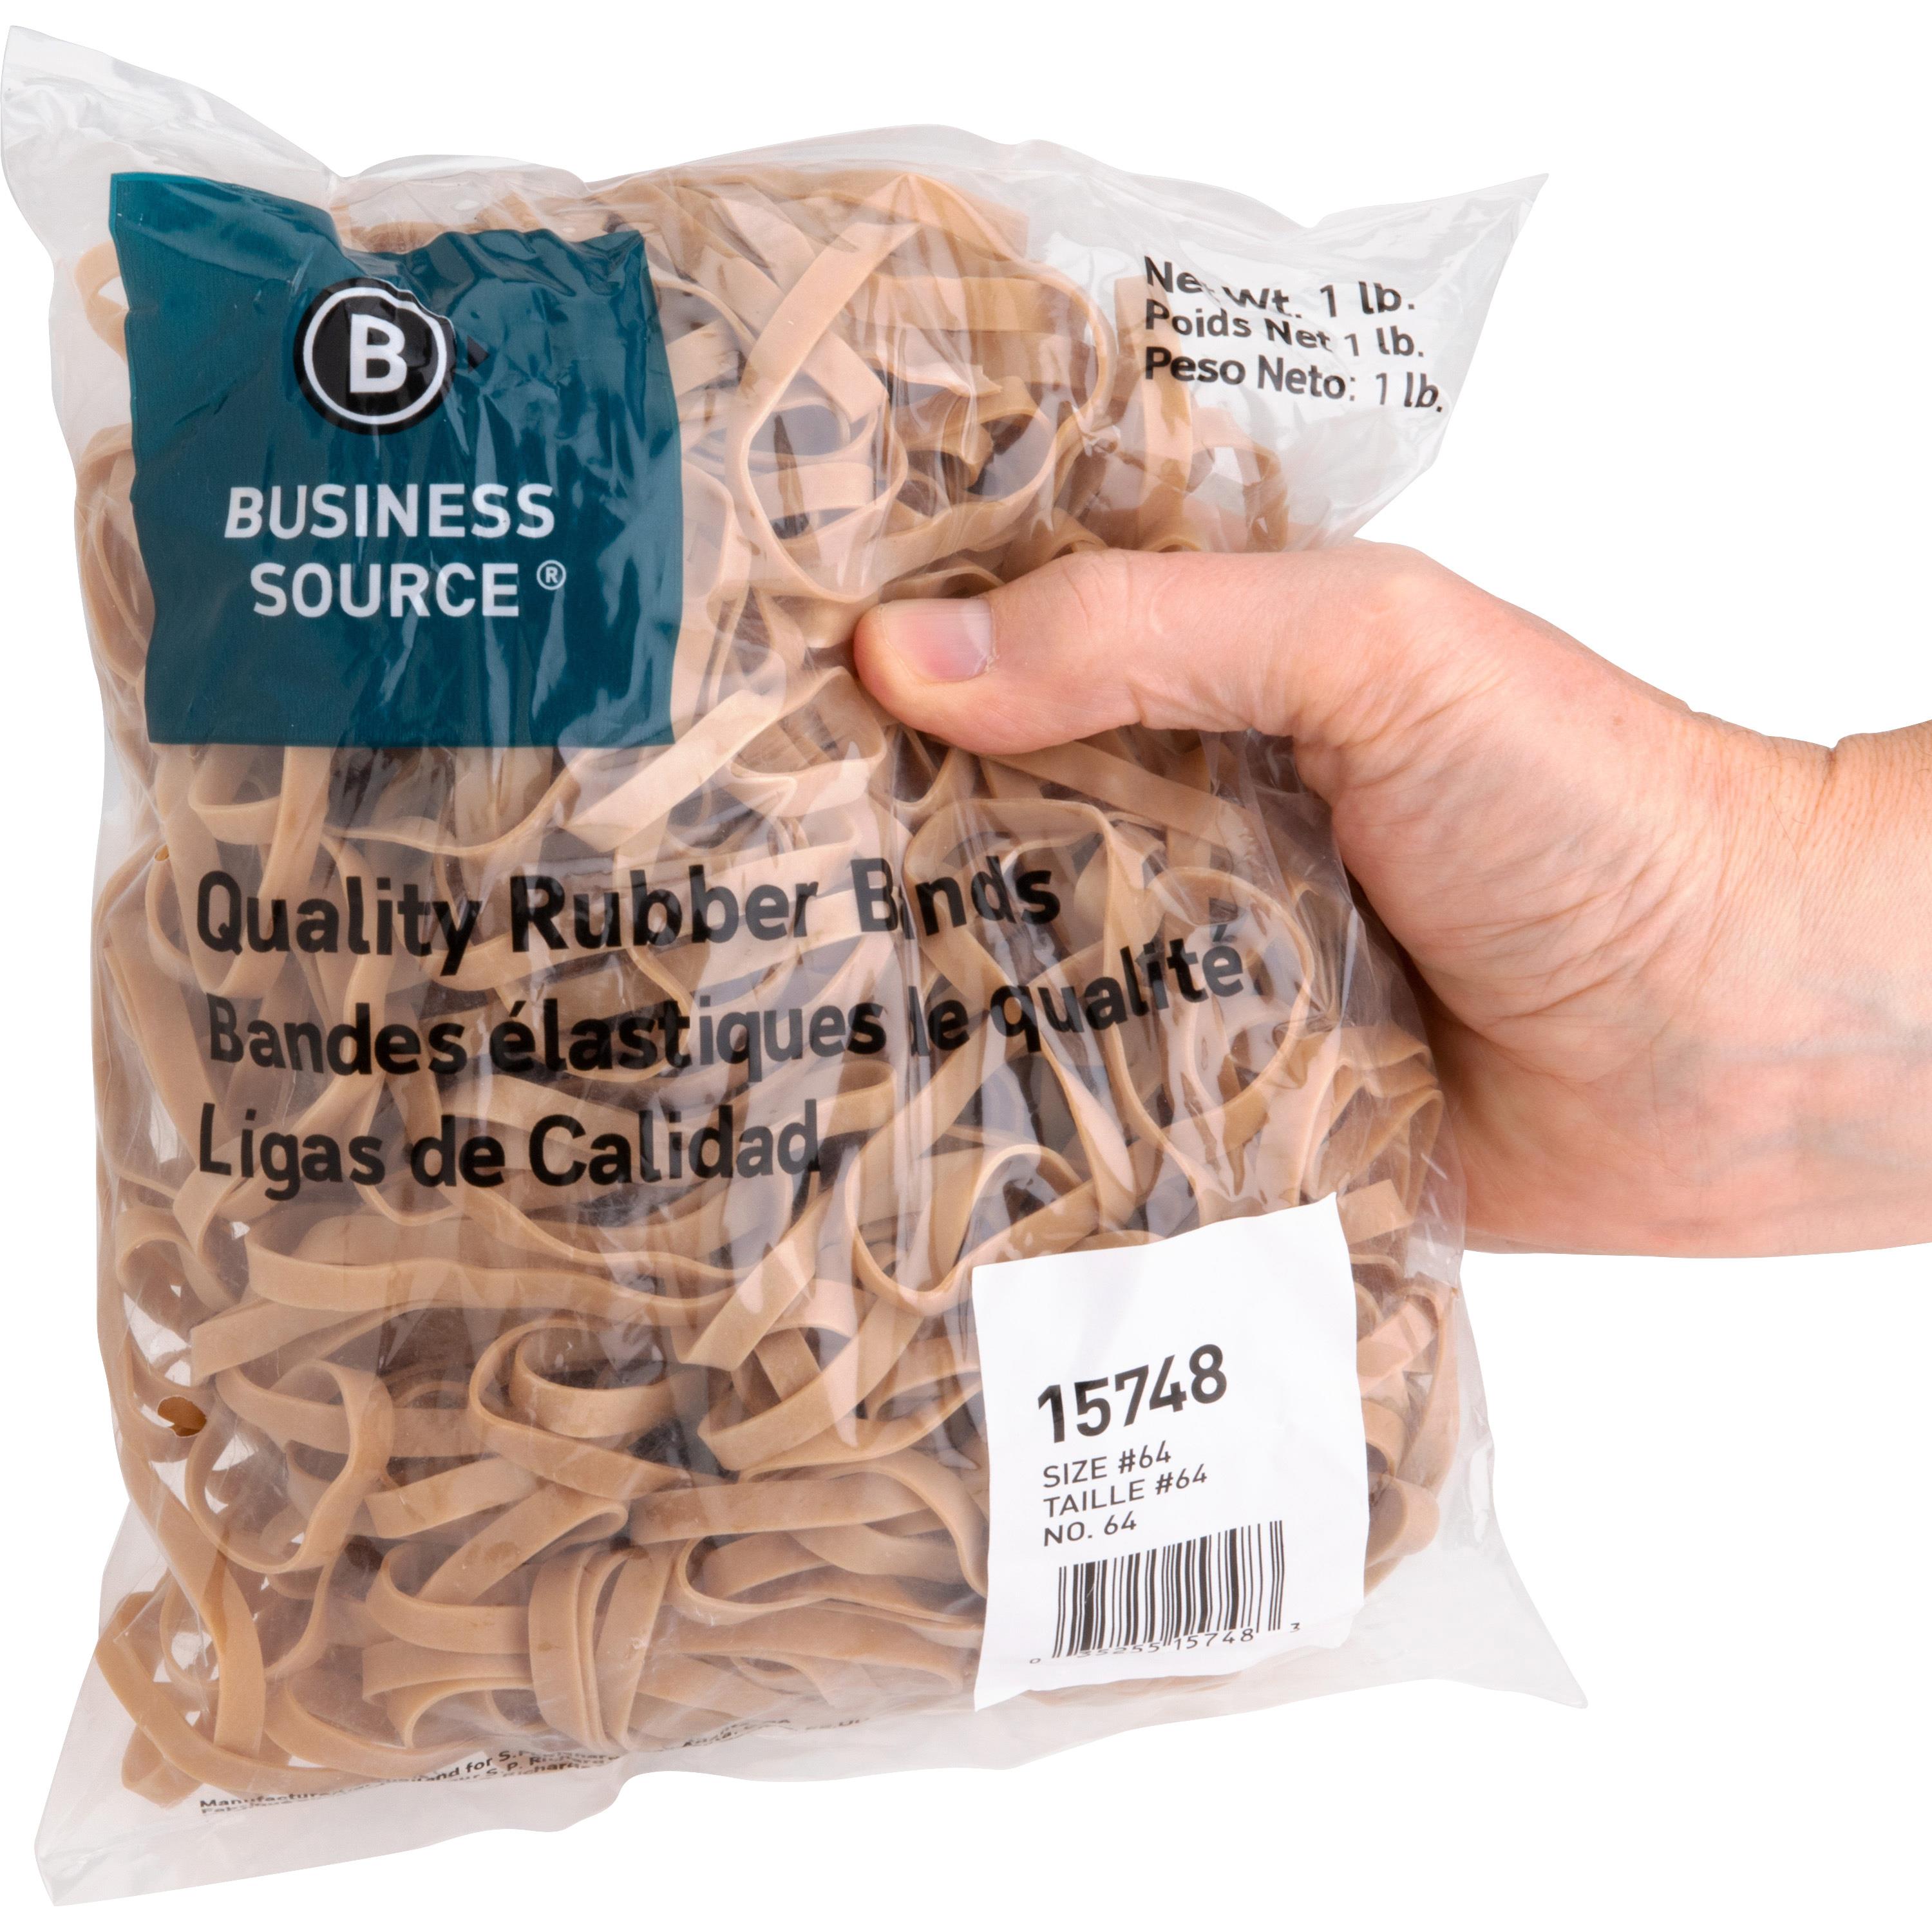 Business Source Quality Rubber Bands - Size: #64 - 3.3 BSN15748